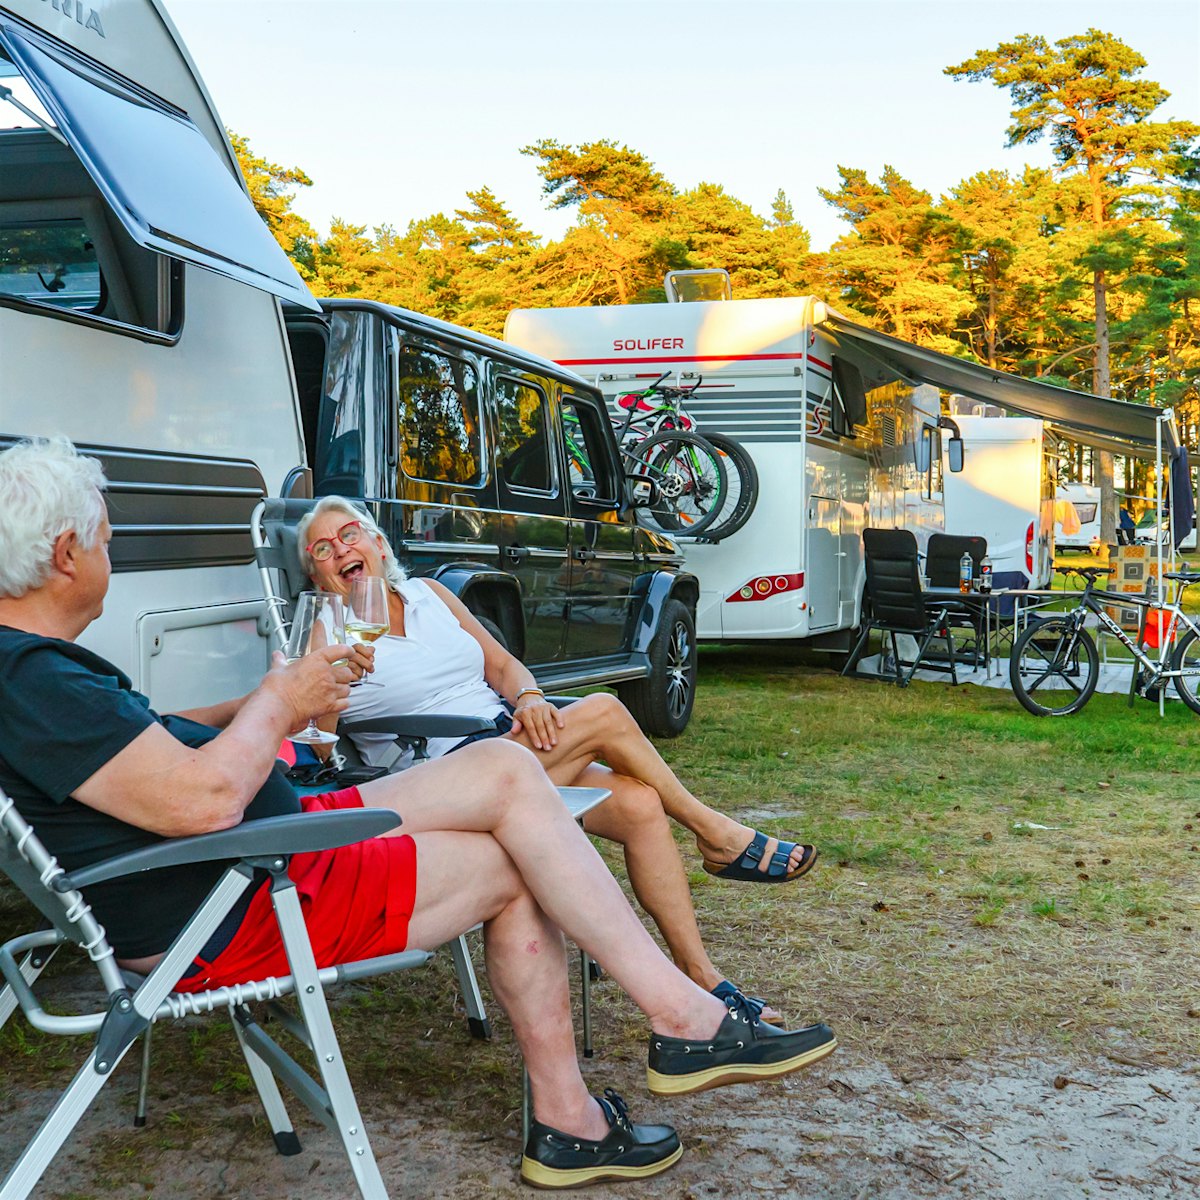 A married couple sits in front of their caravan, laughing and toasting two glasses together in the evening sun. Photo